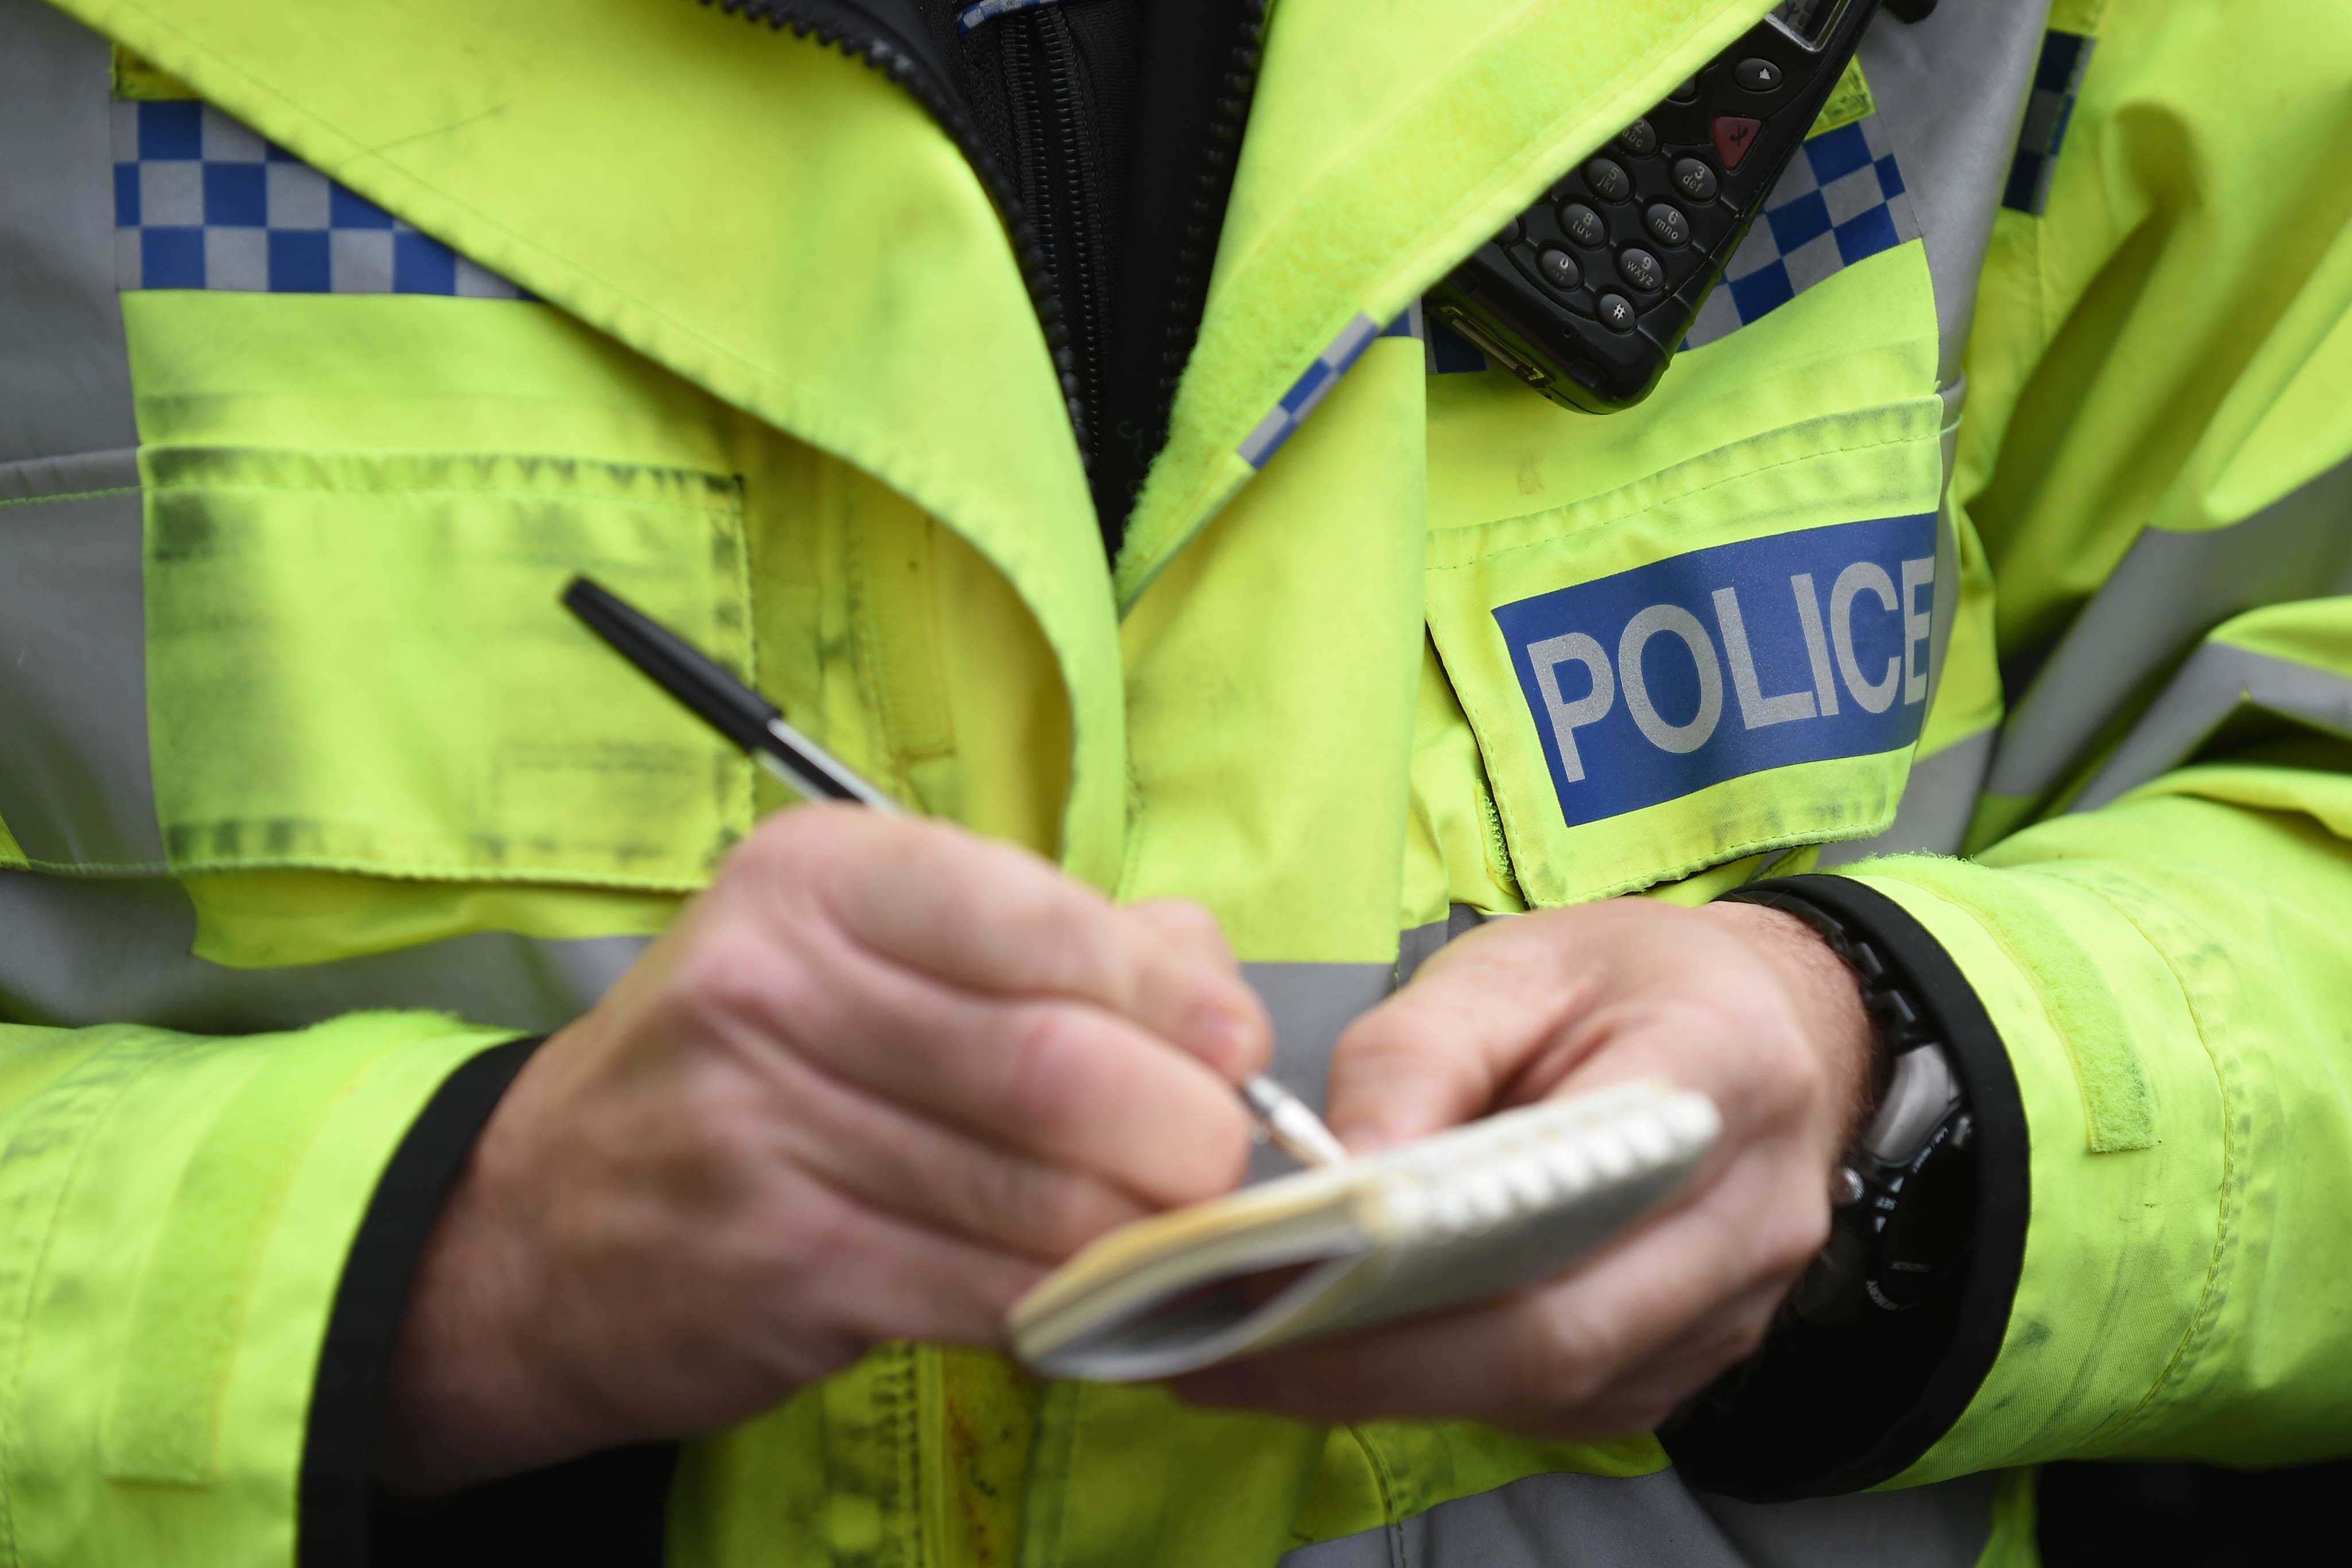 Police officers are reportedly not responding to violent attacks on shop workers